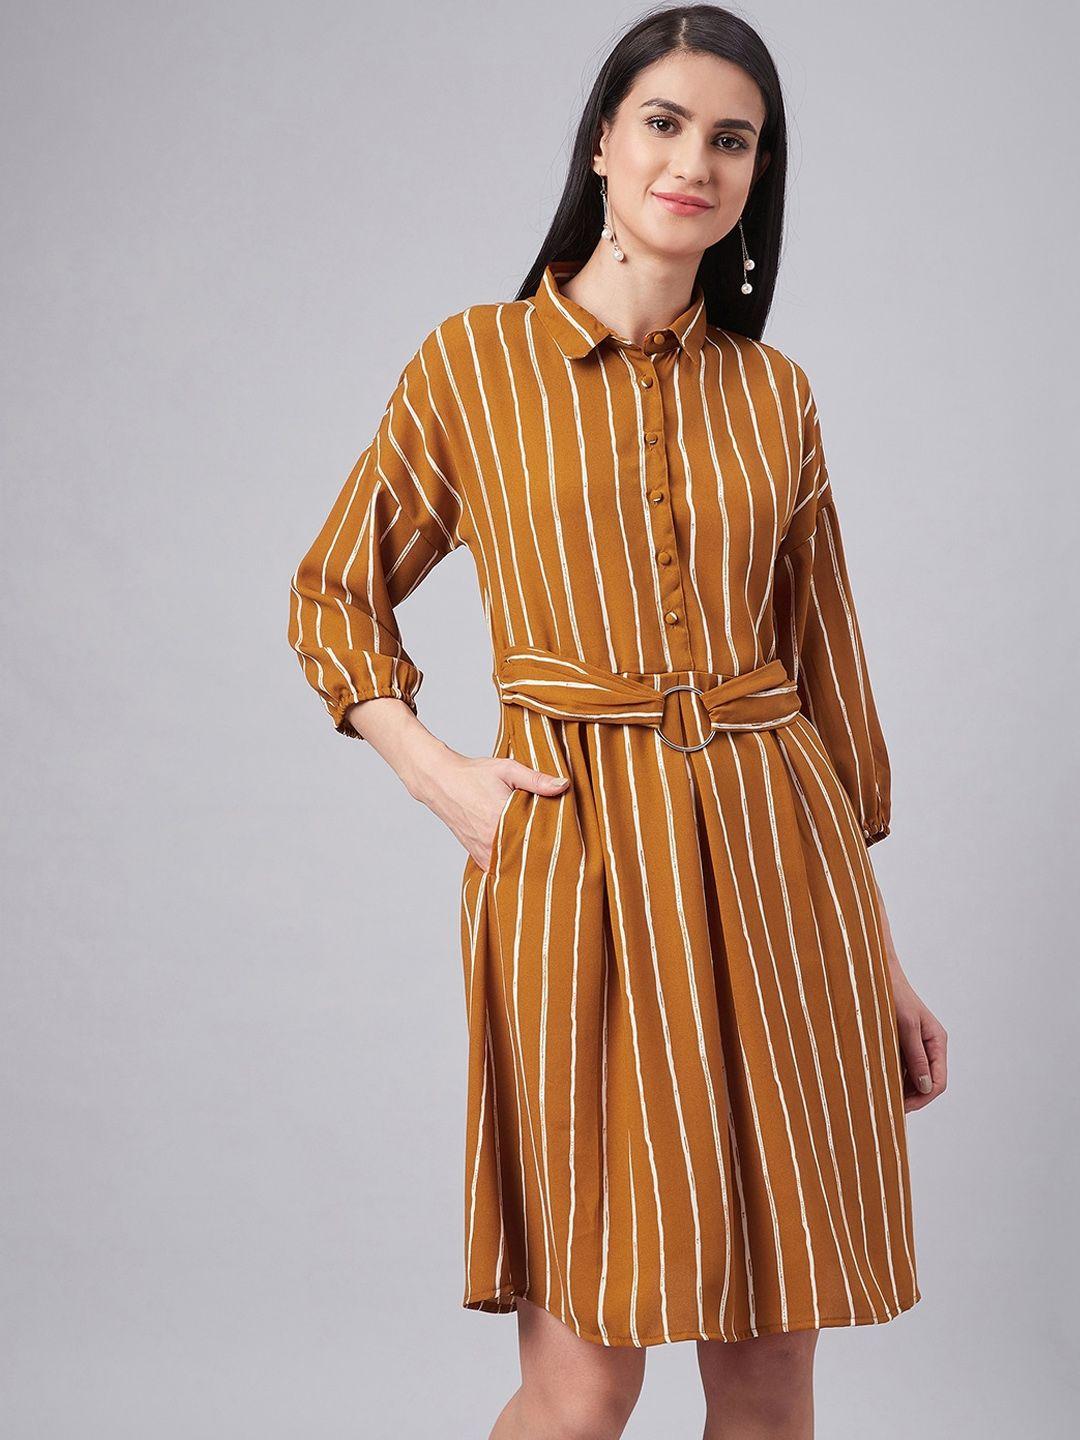 marie-claire-women-mustard-yellow-striped-a-line-dress